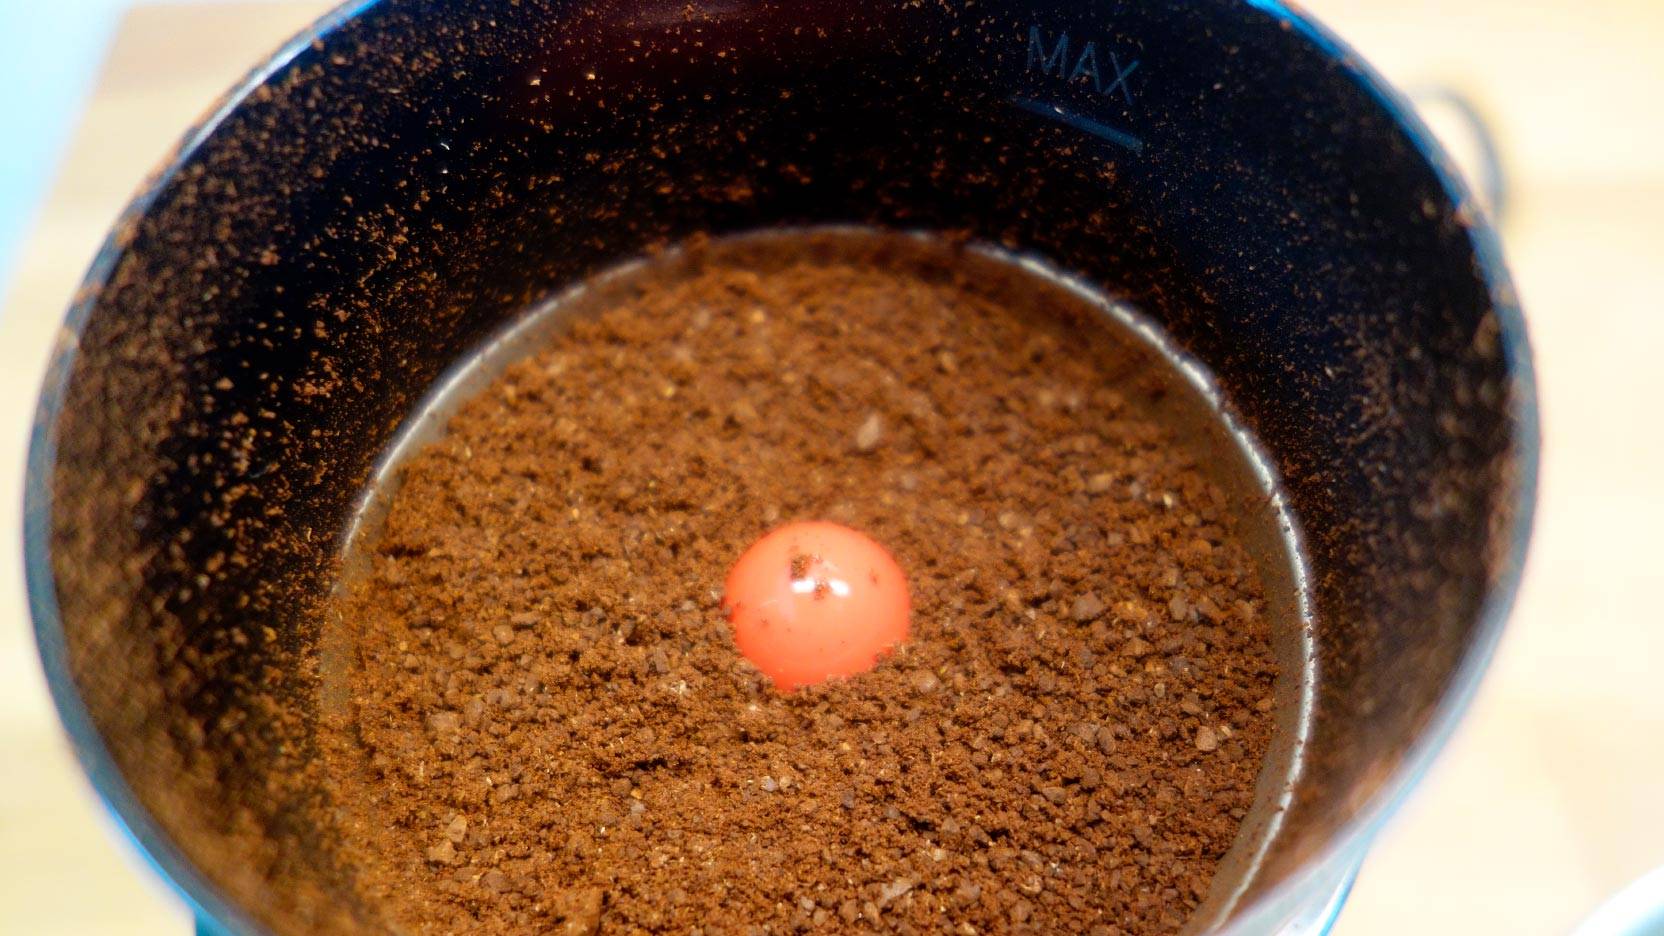 Image of ground coffee in the Bodum Bistro coffee mill